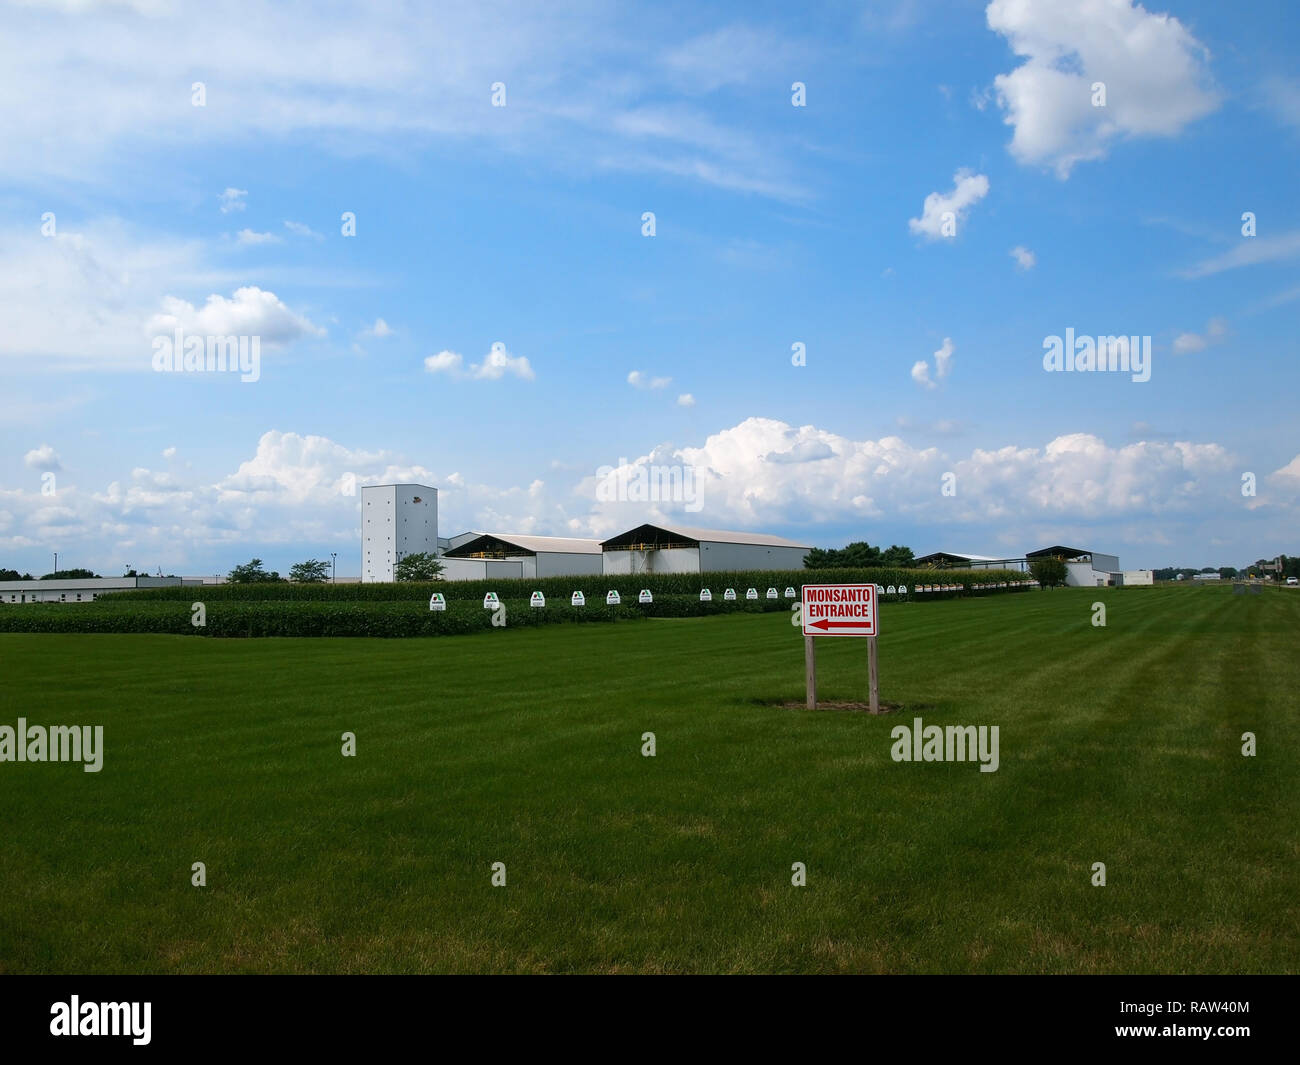 CONSTANTINE, MI - JULY 29, 2018: A field of corn and bright green grass under a blue sky with clouds  at a Monsanto faciility in Constantine, Michigan Stock Photo